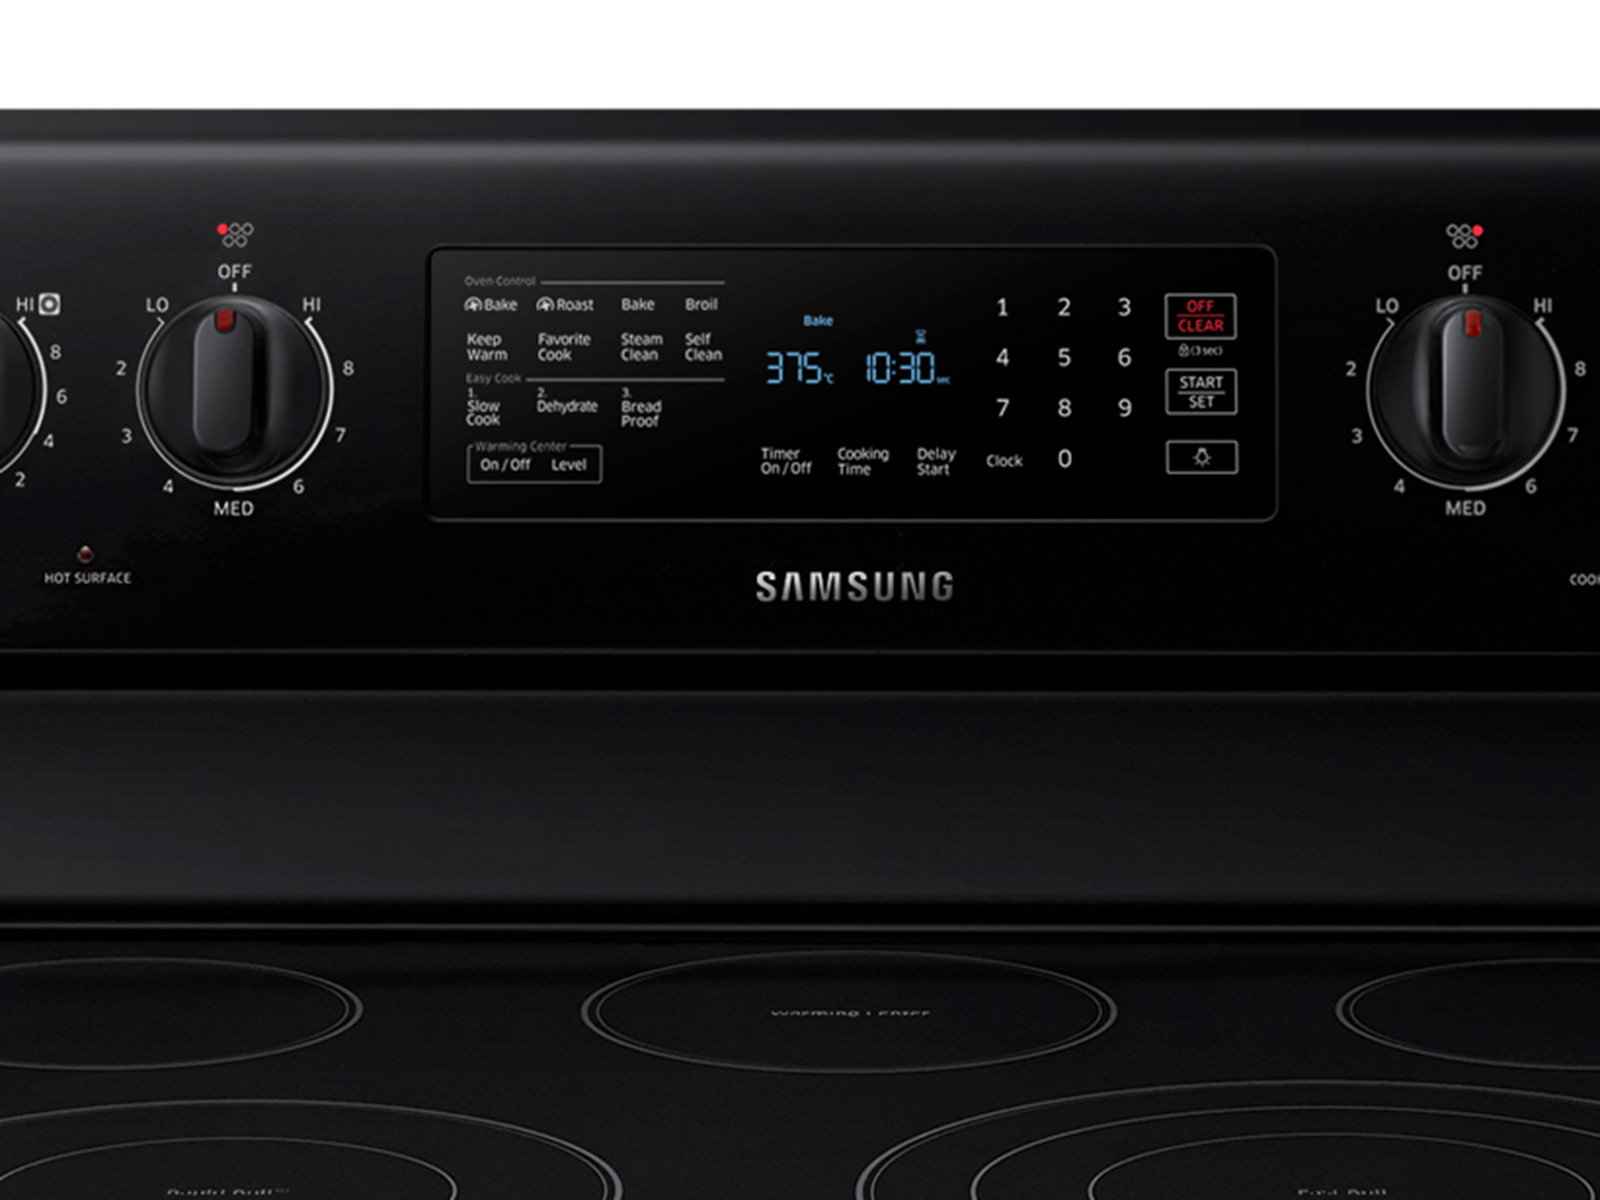 NE59J7630SG by Samsung - 5.9 cu. ft. Electric Range with True Convection